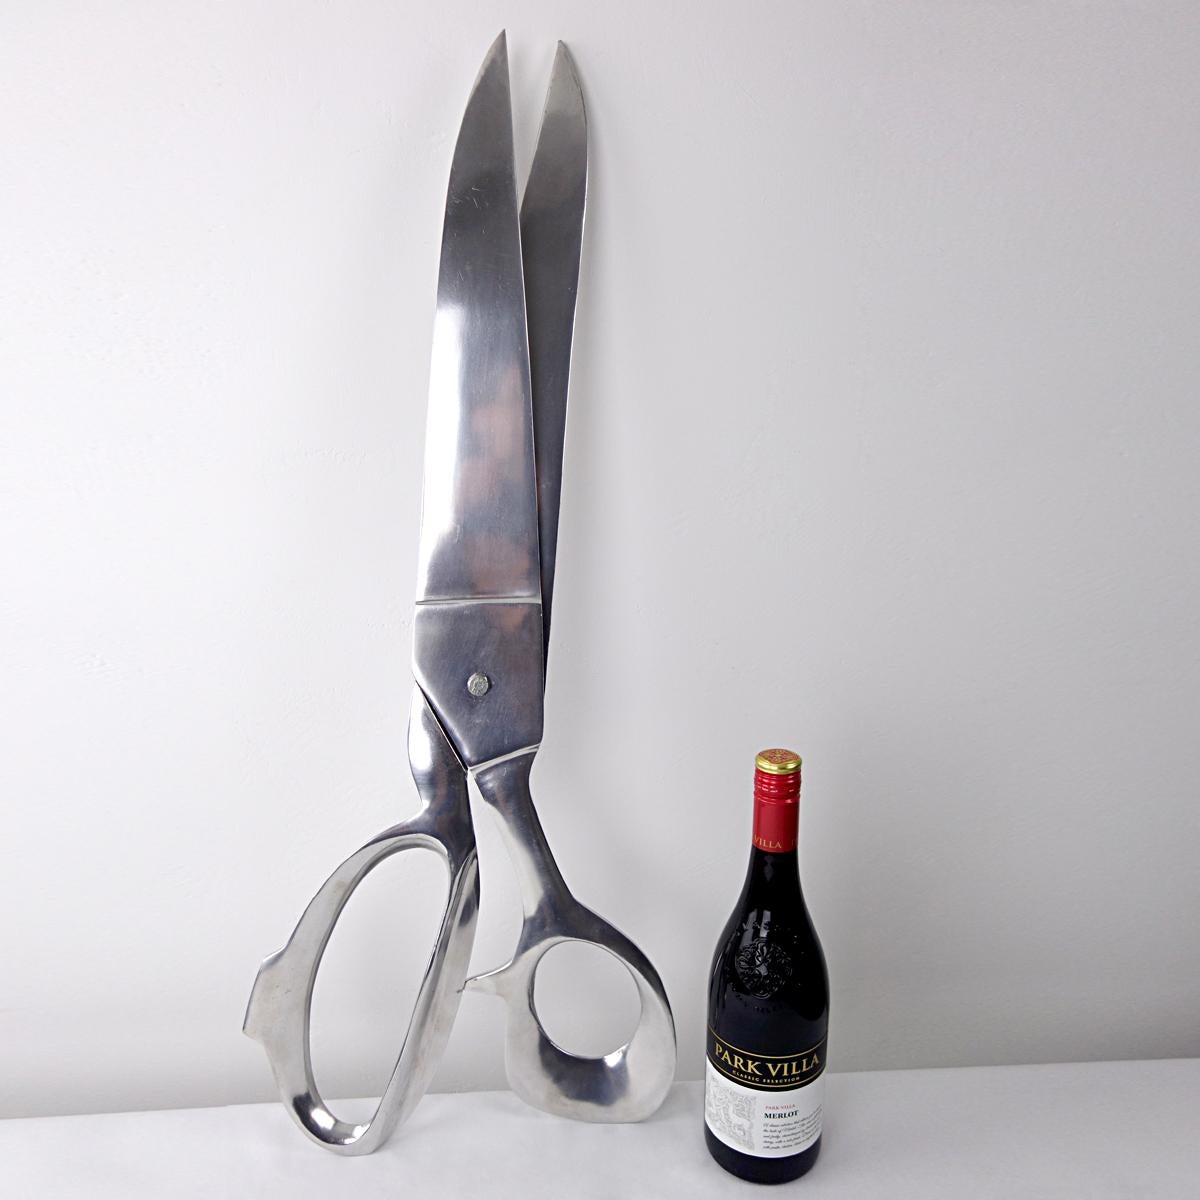 Cut, cut, cut! With its height of nearly 31 inches this pair of scissors is a true statement piece.
Its two parts can move but fortunately have not been sharpened.
This rare object would make for a wonderful wall decoration in a fabric swatch room